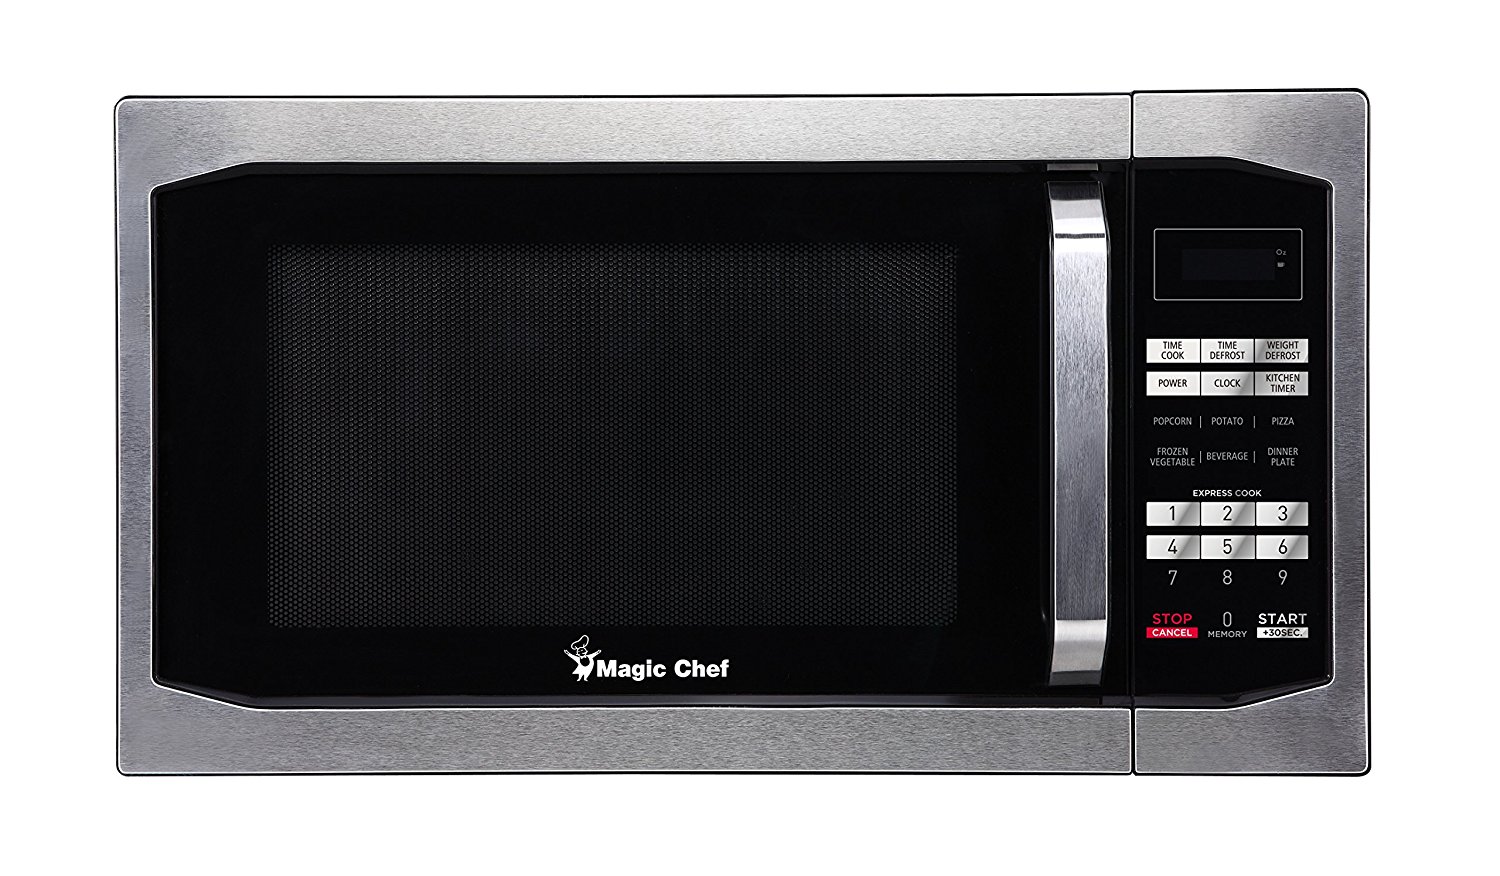 Magic Chef MCM1611ST 1100W Microwave Oven, 1.6 cu.ft., Stainless Steel